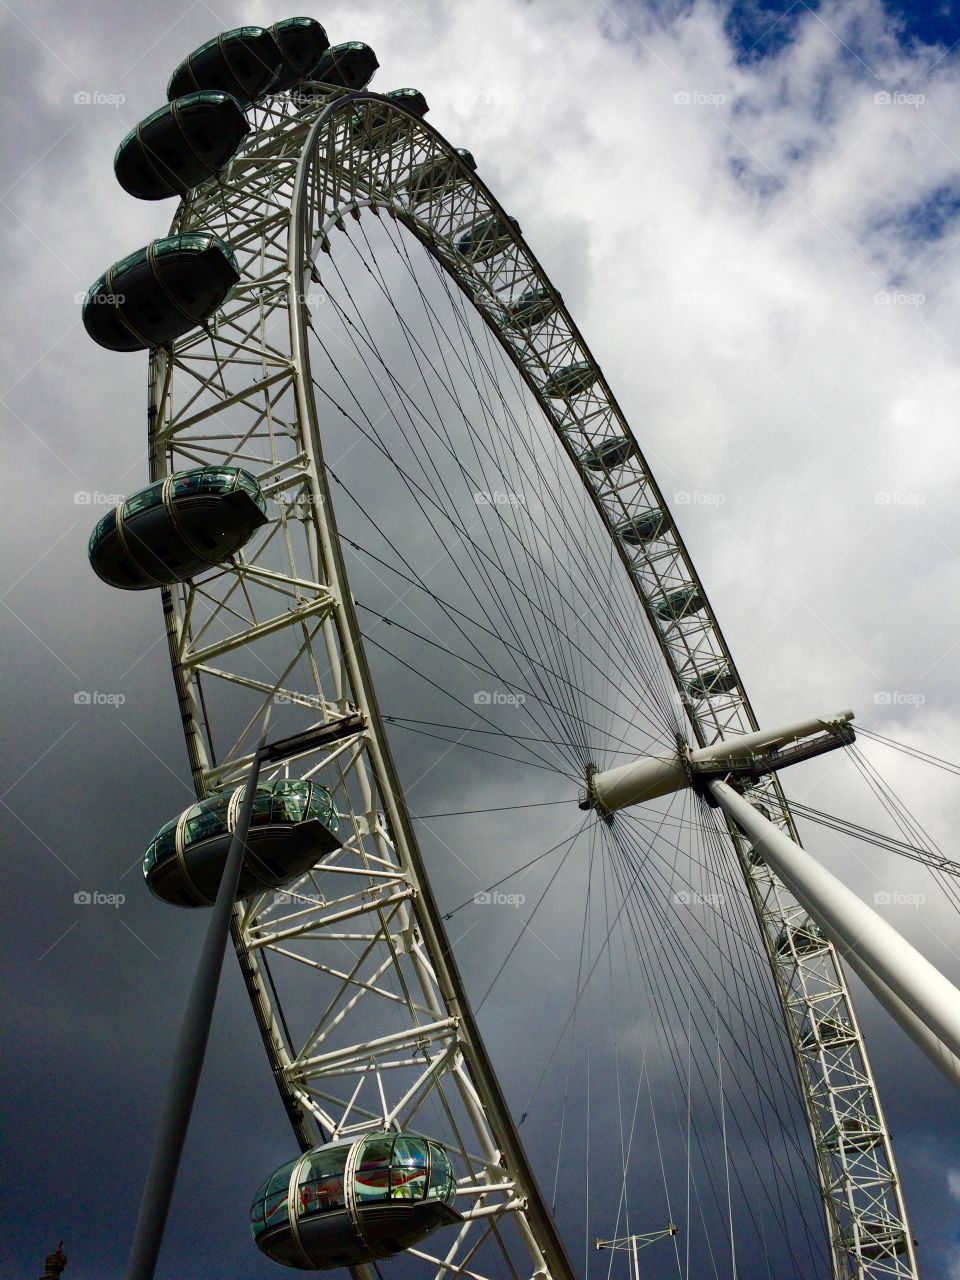 Cloudy skies create a backdrop for the London Eye